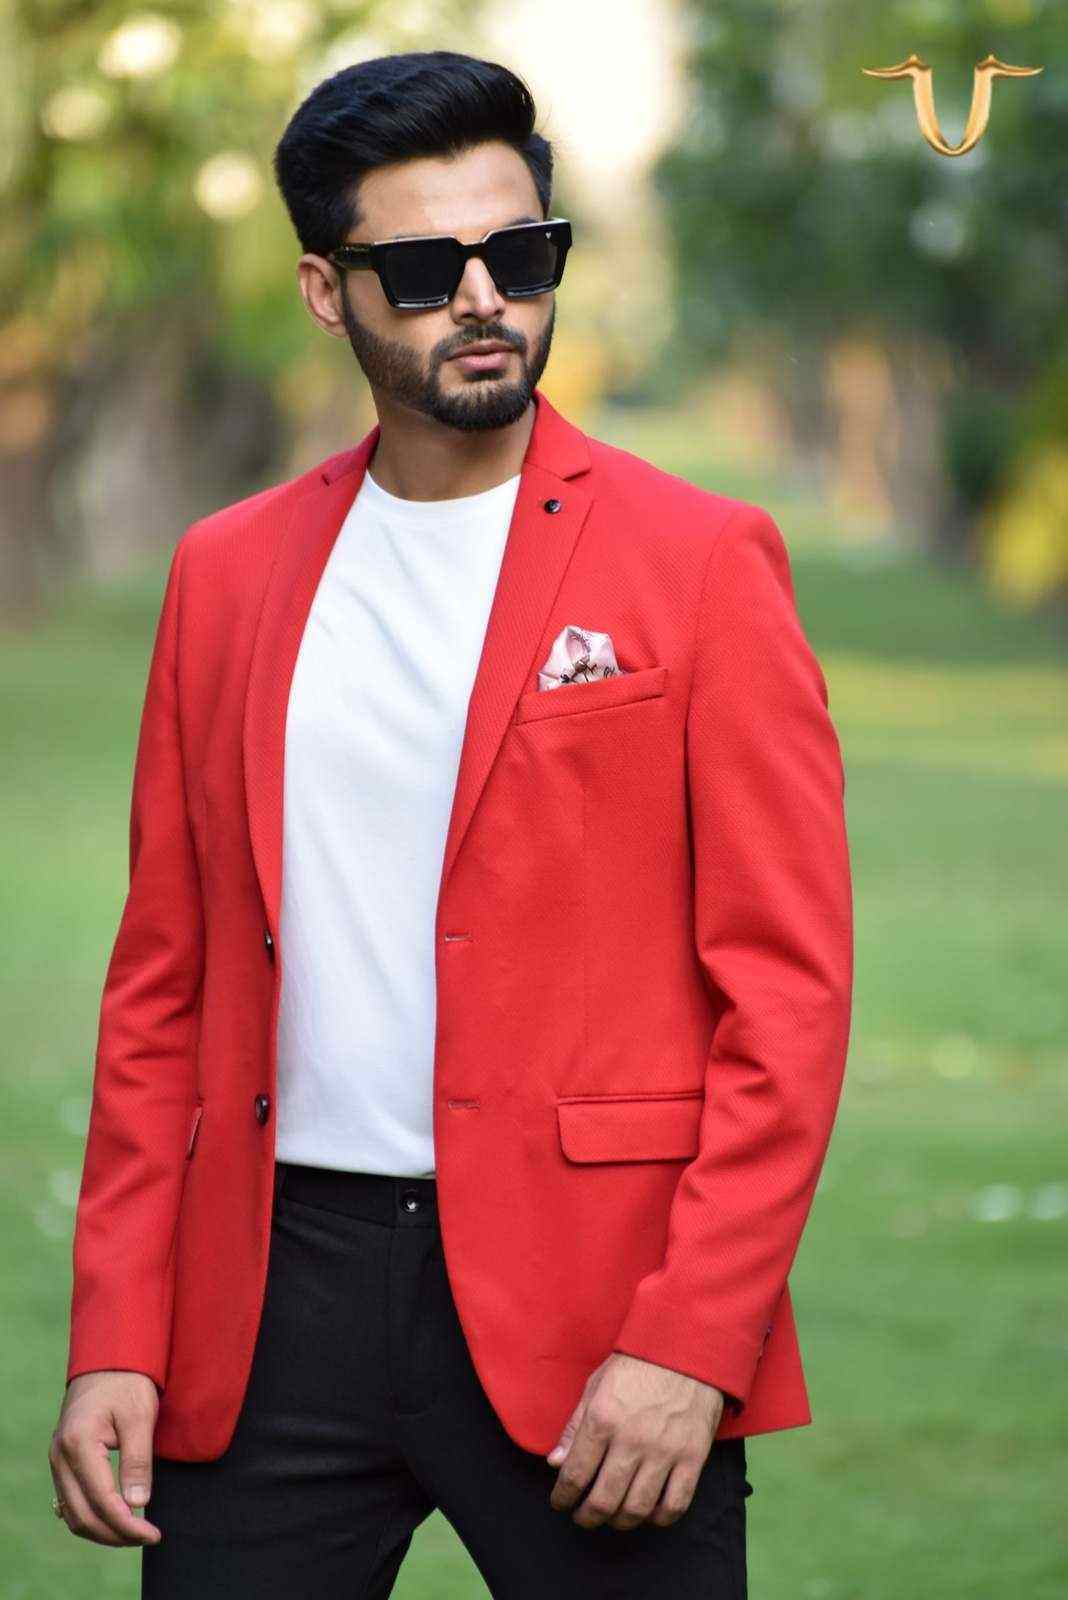  A versatile red blazer that can be dressed up or down. The blazer is made from a soft, stretchy fabric and features a trendy all-over print